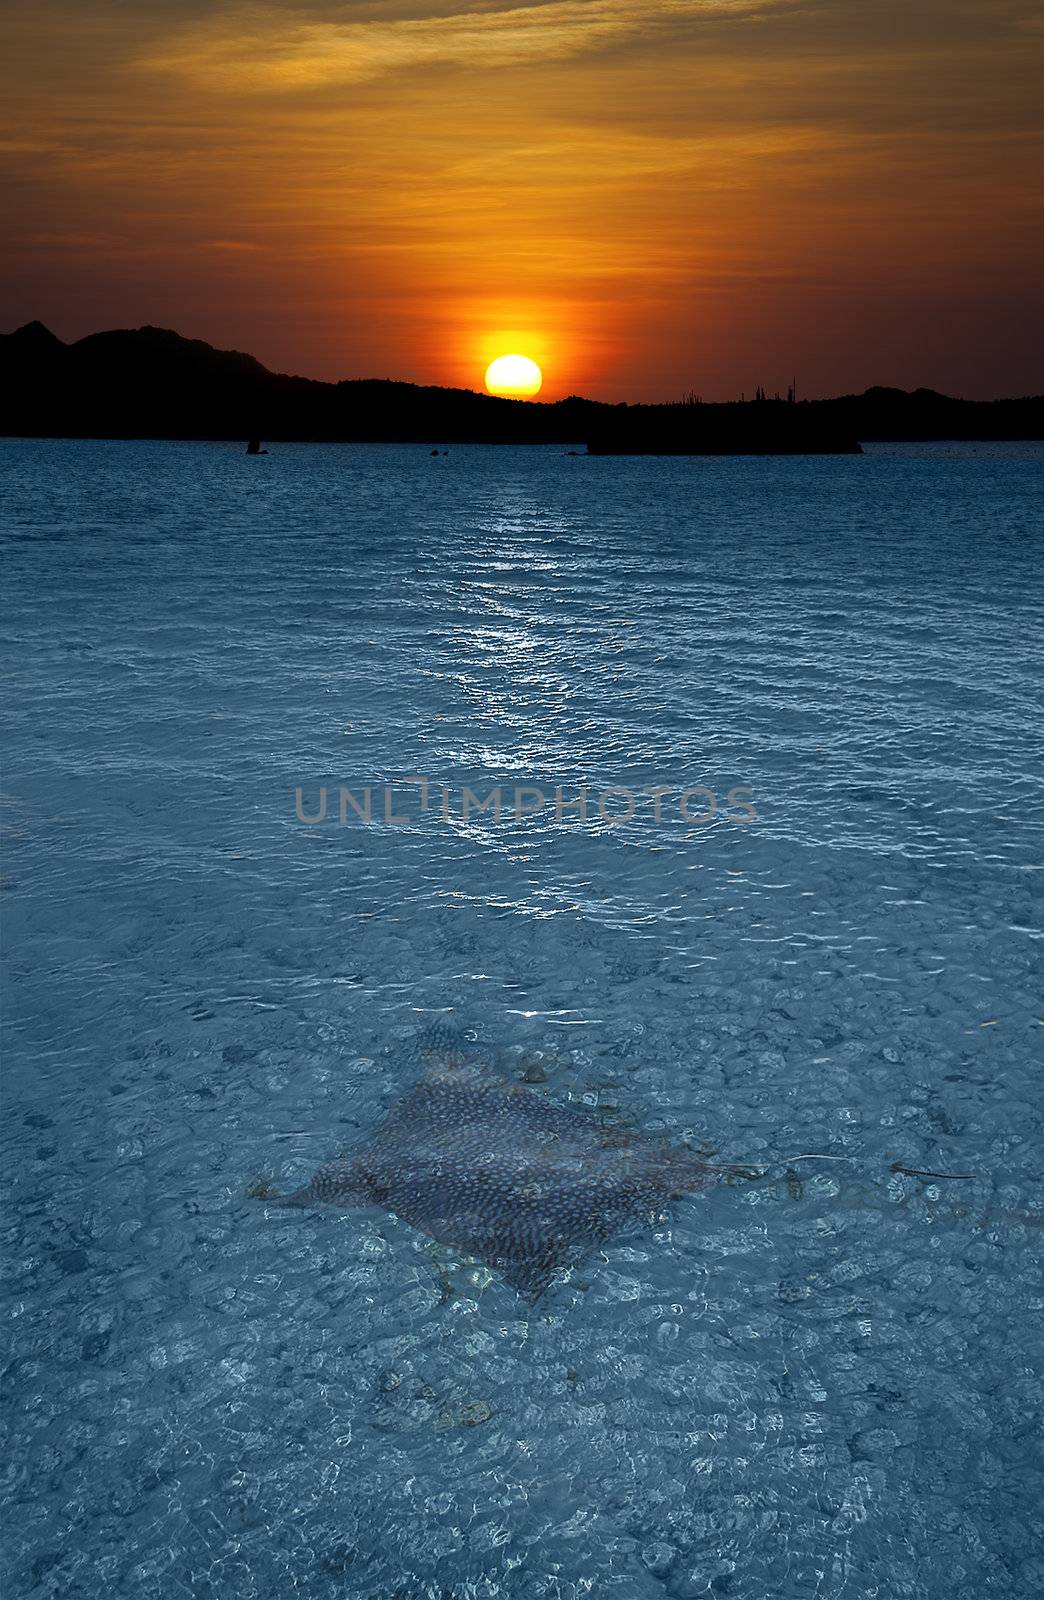 An Eagle ray swimming in the sunset, at the Maldives